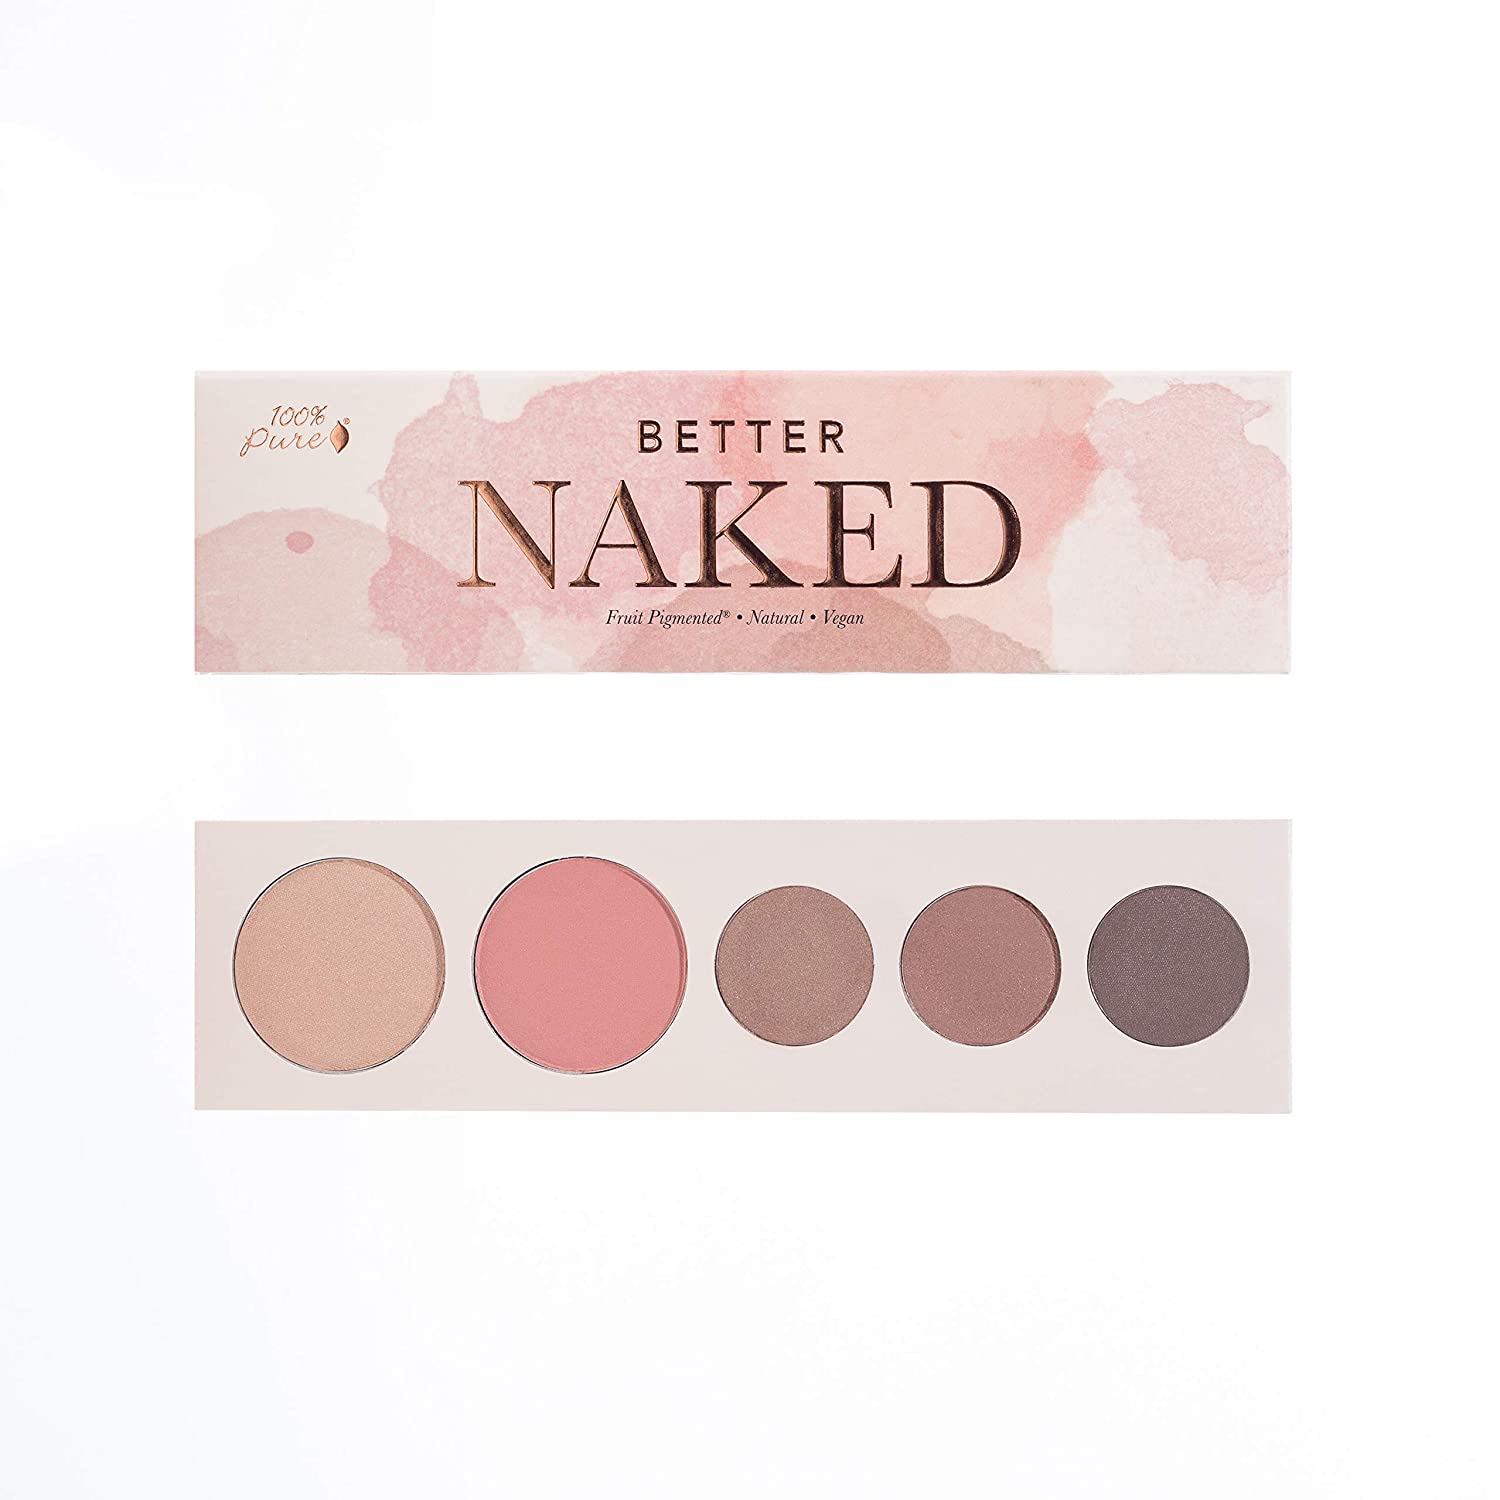 100% PURE Better Naked Makeup Palette All in One Compact 3 Eyeshadow, Blush, Face Highlighter, Fruit Pigmented Natural Nude Neutral Look for All Skin Types - Vegan (Soft Rose, Taupe, Beige Tones)